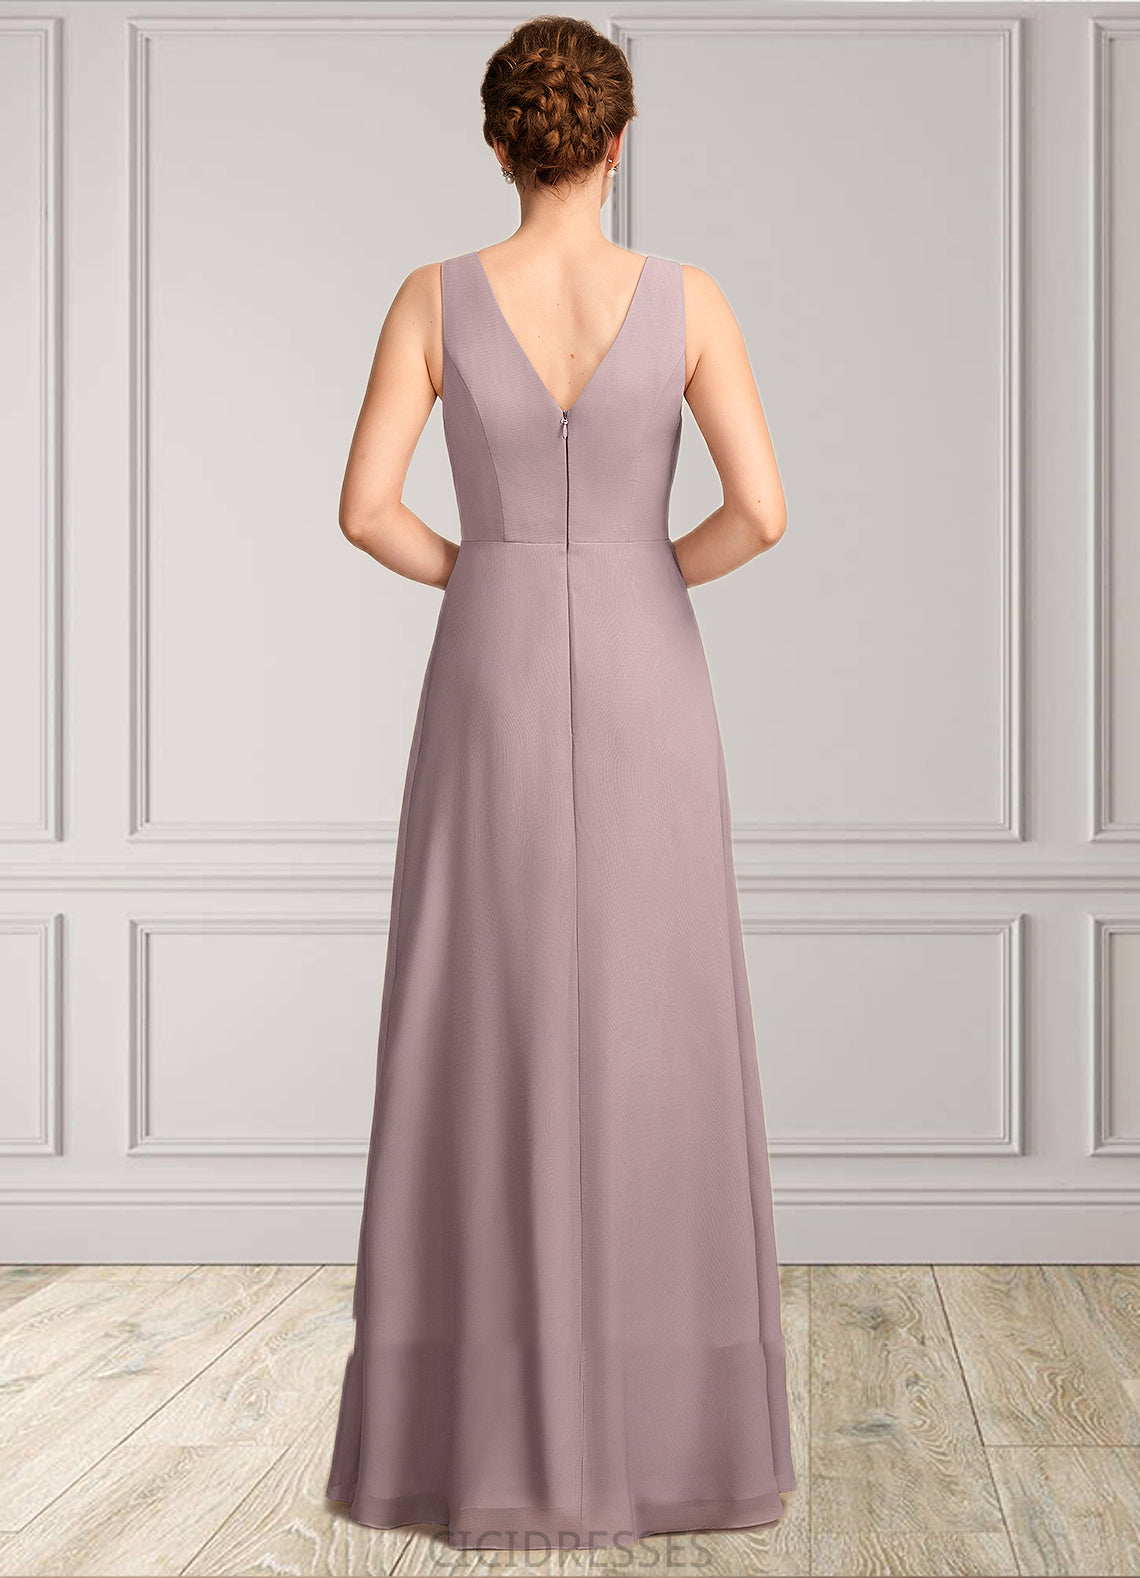 Ruby A-Line V-neck Floor-Length Chiffon Mother of the Bride Dress With Ruffle CIC8126P0015026